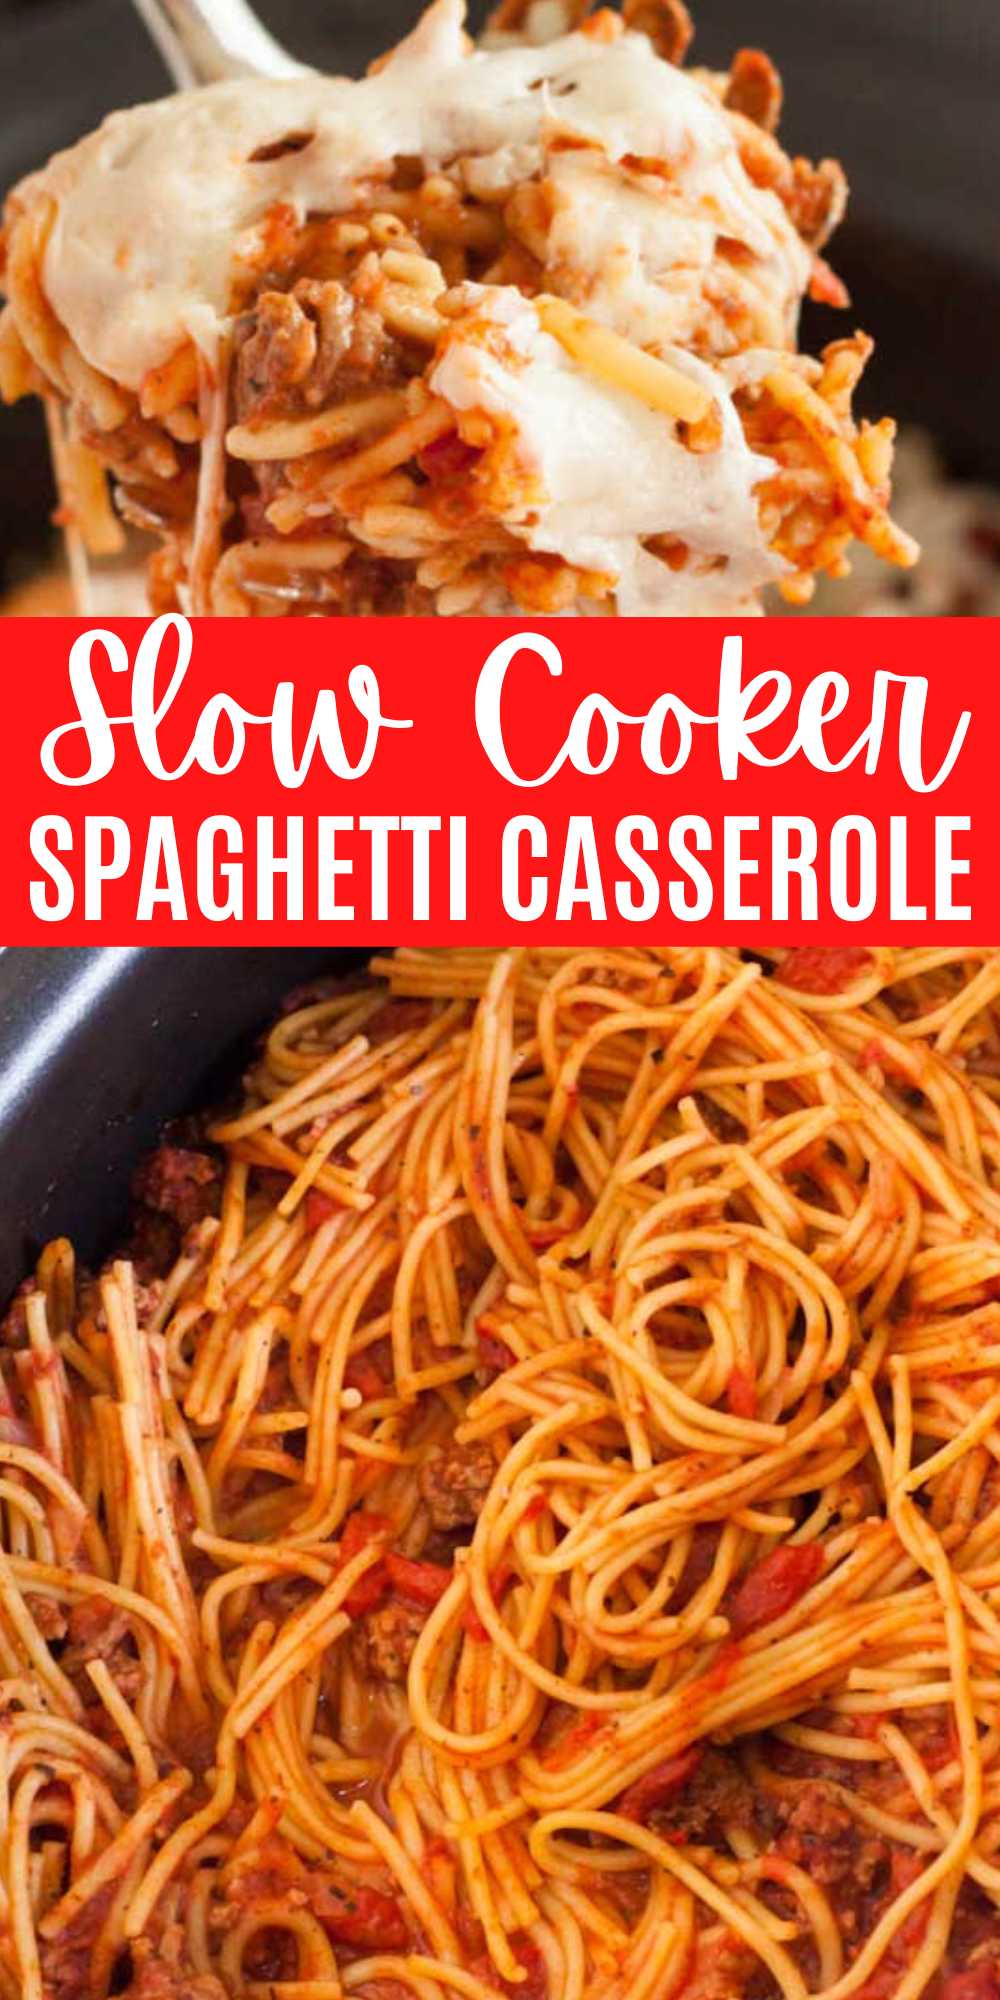 Crock pot Spaghetti Casserole Recipe is the best one pot meal. Cheesy crockpot spaghetti is the perfect weeknight dinner idea. Spaghetti is always a hit and this super easy Crock Pot Spaghetti Casserole Recipe makes it even easier.  The homemade sauce has the best flavor and the cheese is melted and delicious. #eatingonadime #crockpotspaghetticasserole #spaghetticasserole